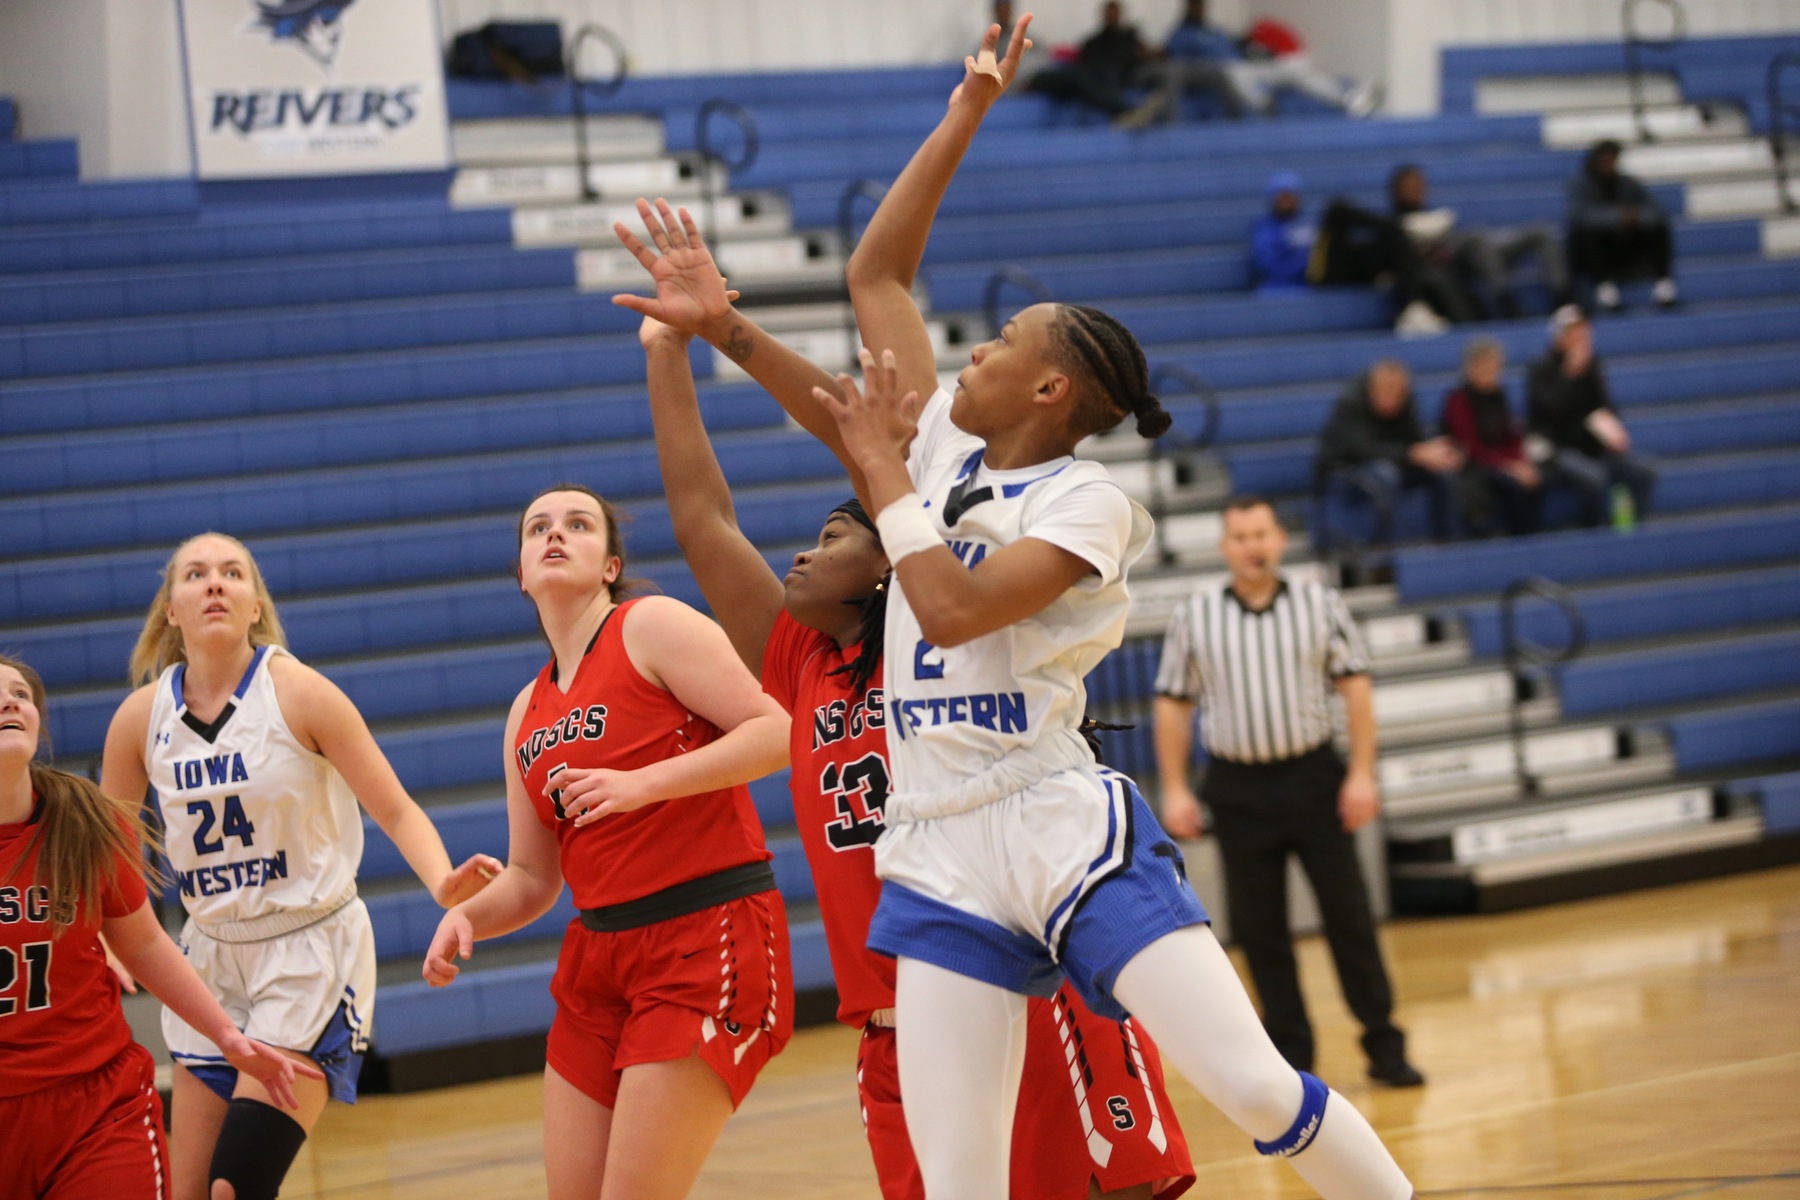 Reiver Women remain undefeated at home